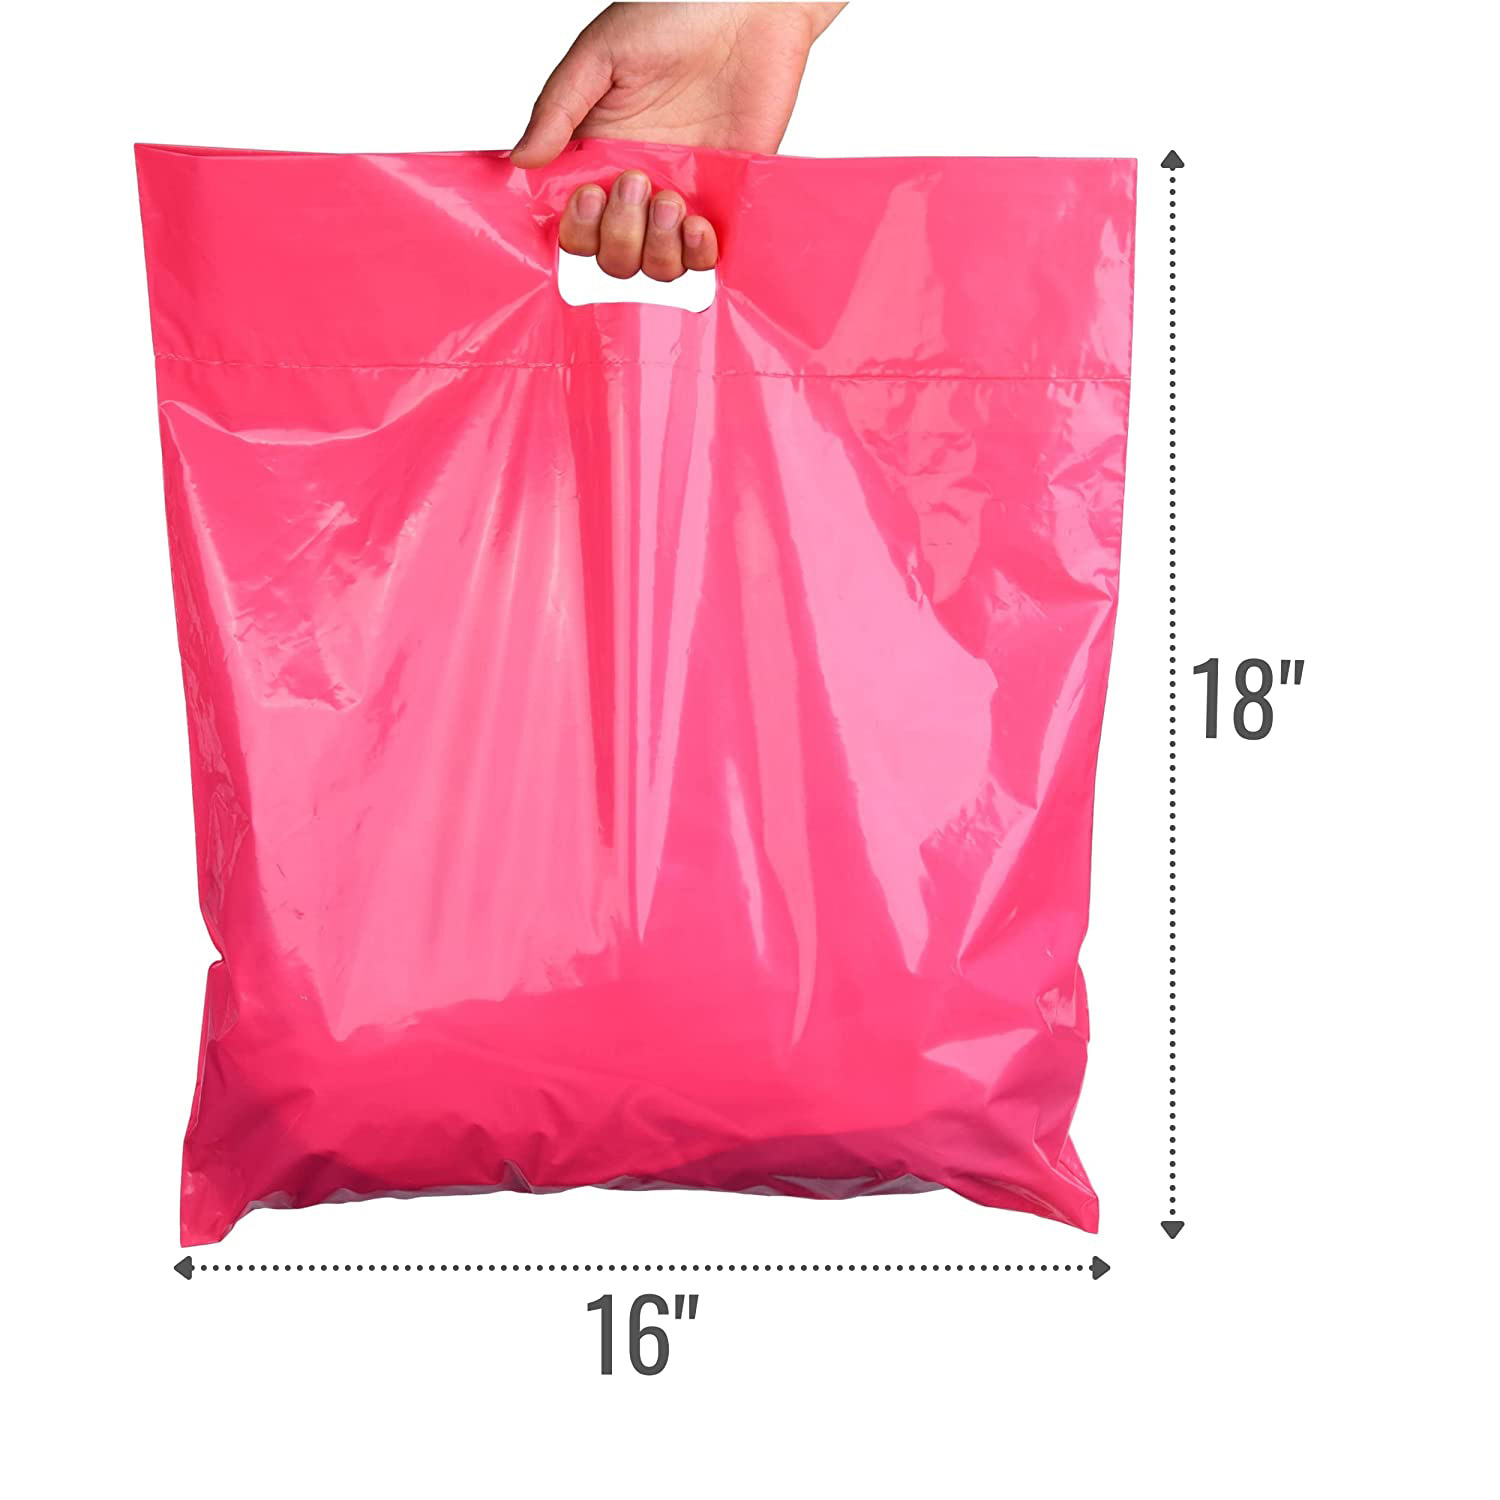 Extra Large Die Cut Plastic Retail Shopping Bags with Handles